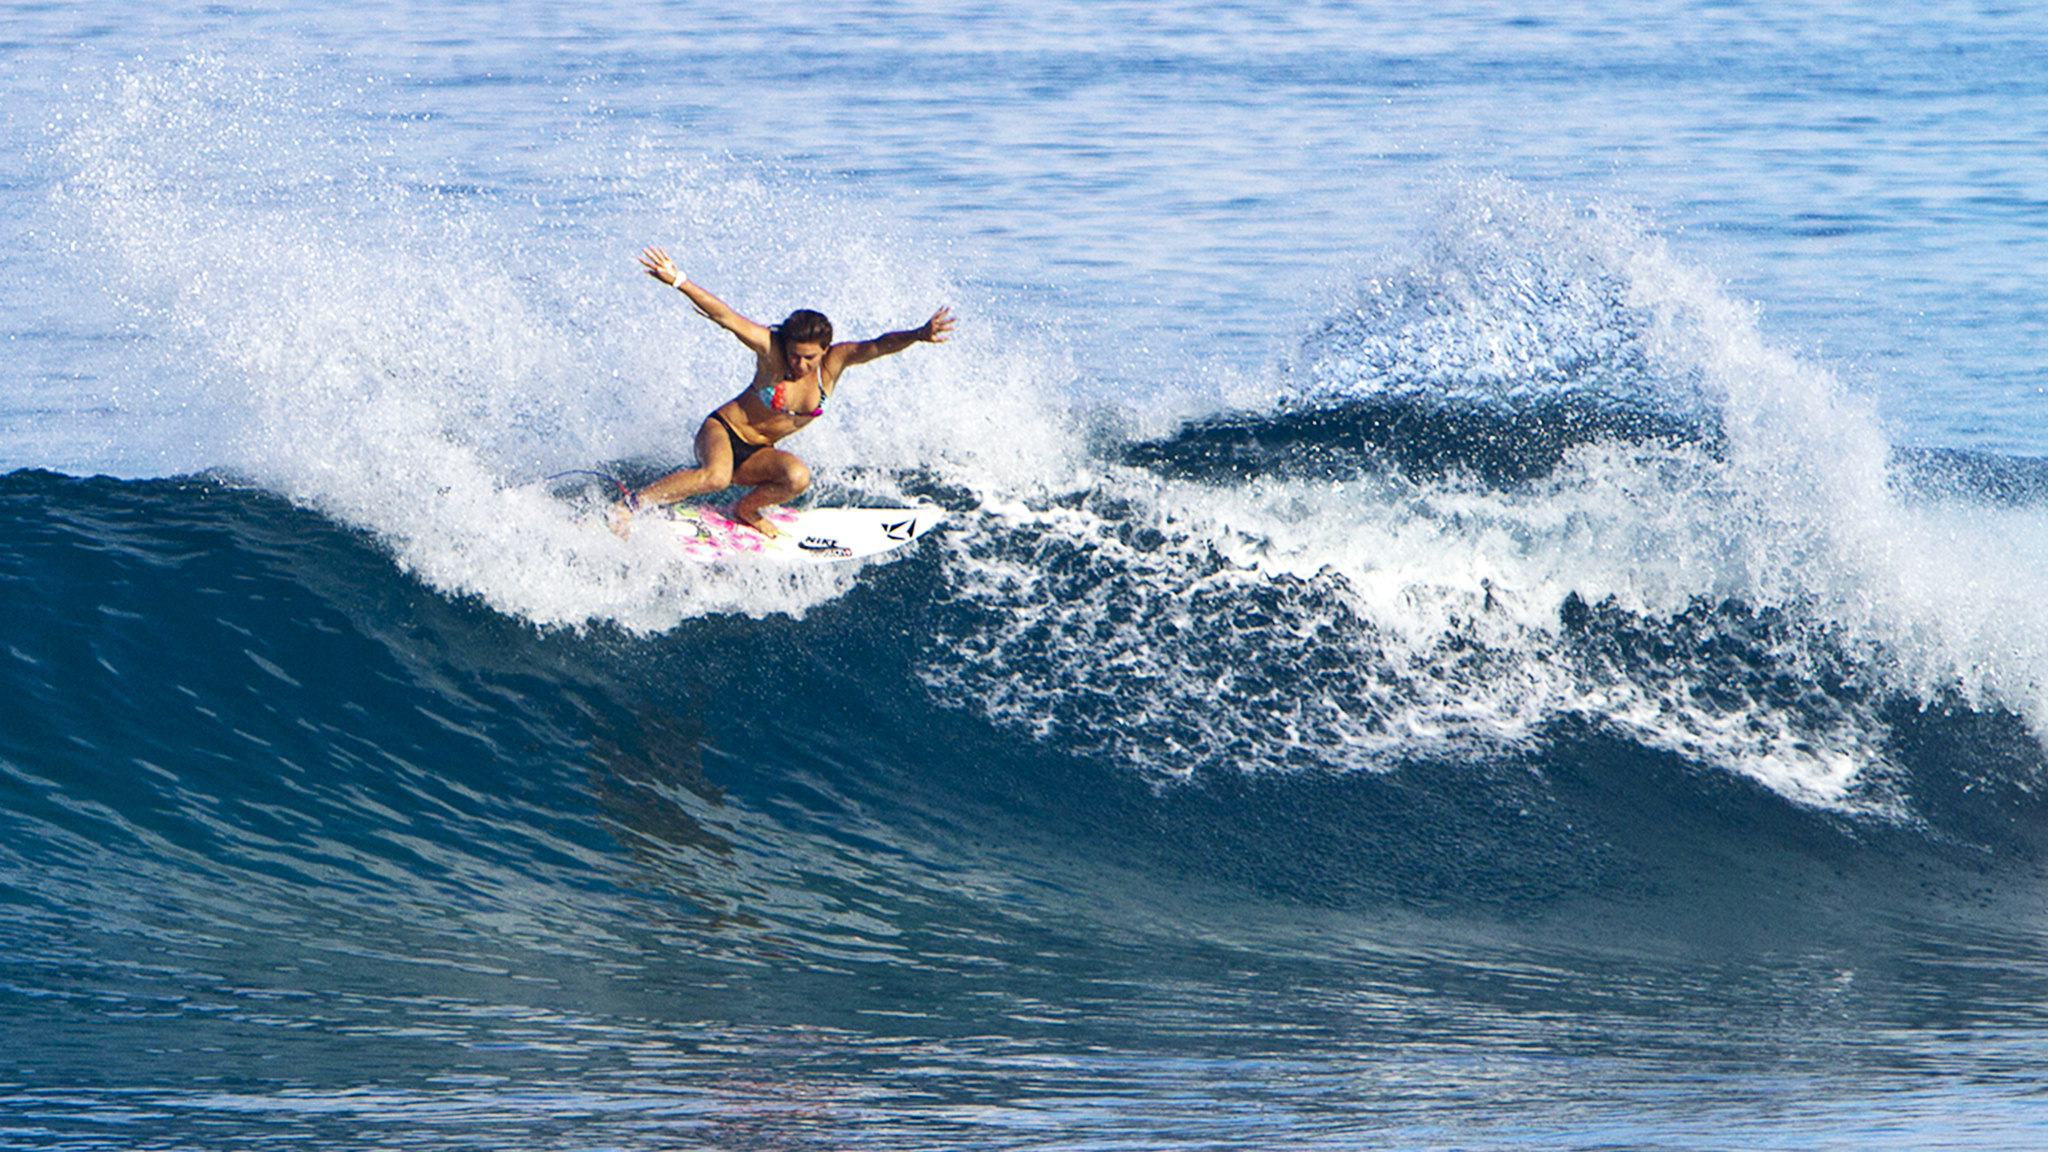 Behind the scenes: Coco Ho surfs naked for ESPNs The Body 